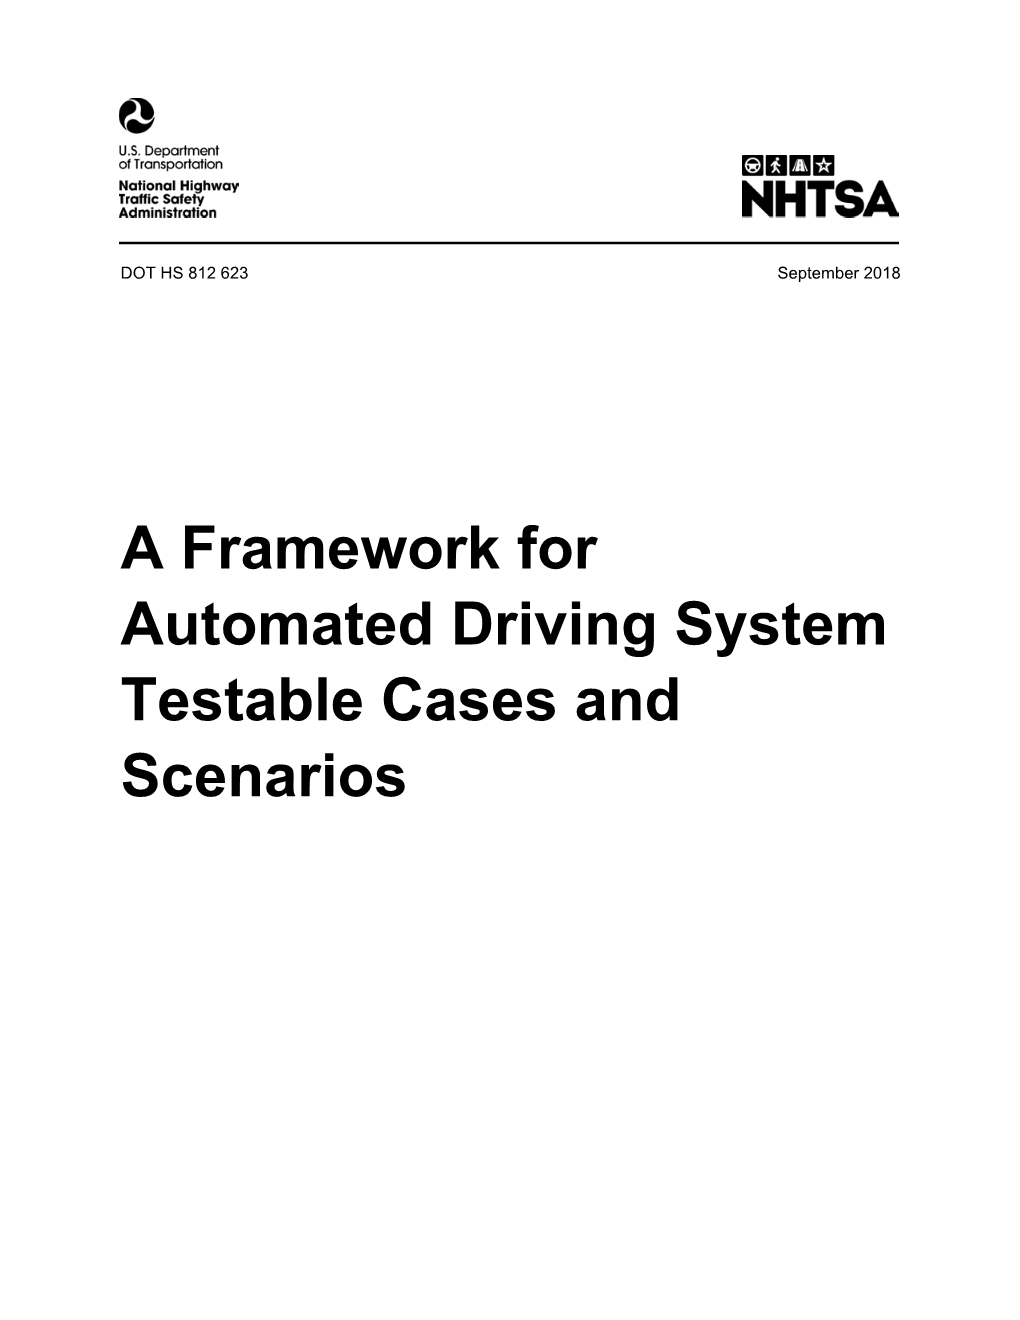 A Framework for Automated Driving System Testable Cases and Scenarios